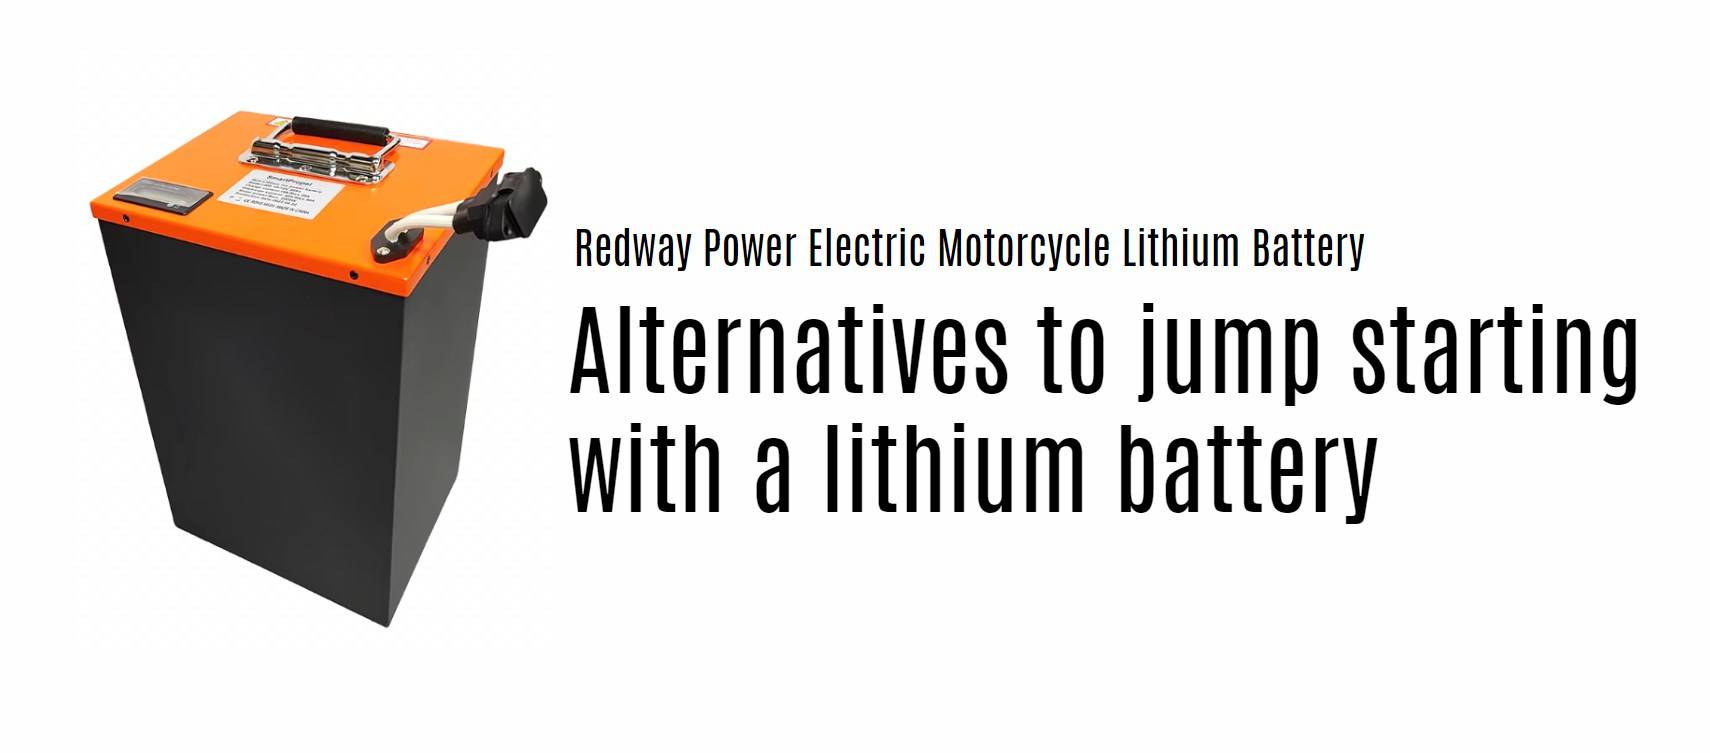 electric motorcycle lithium battery manufacturer factory oem. Alternatives to jump starting with a lithium battery.